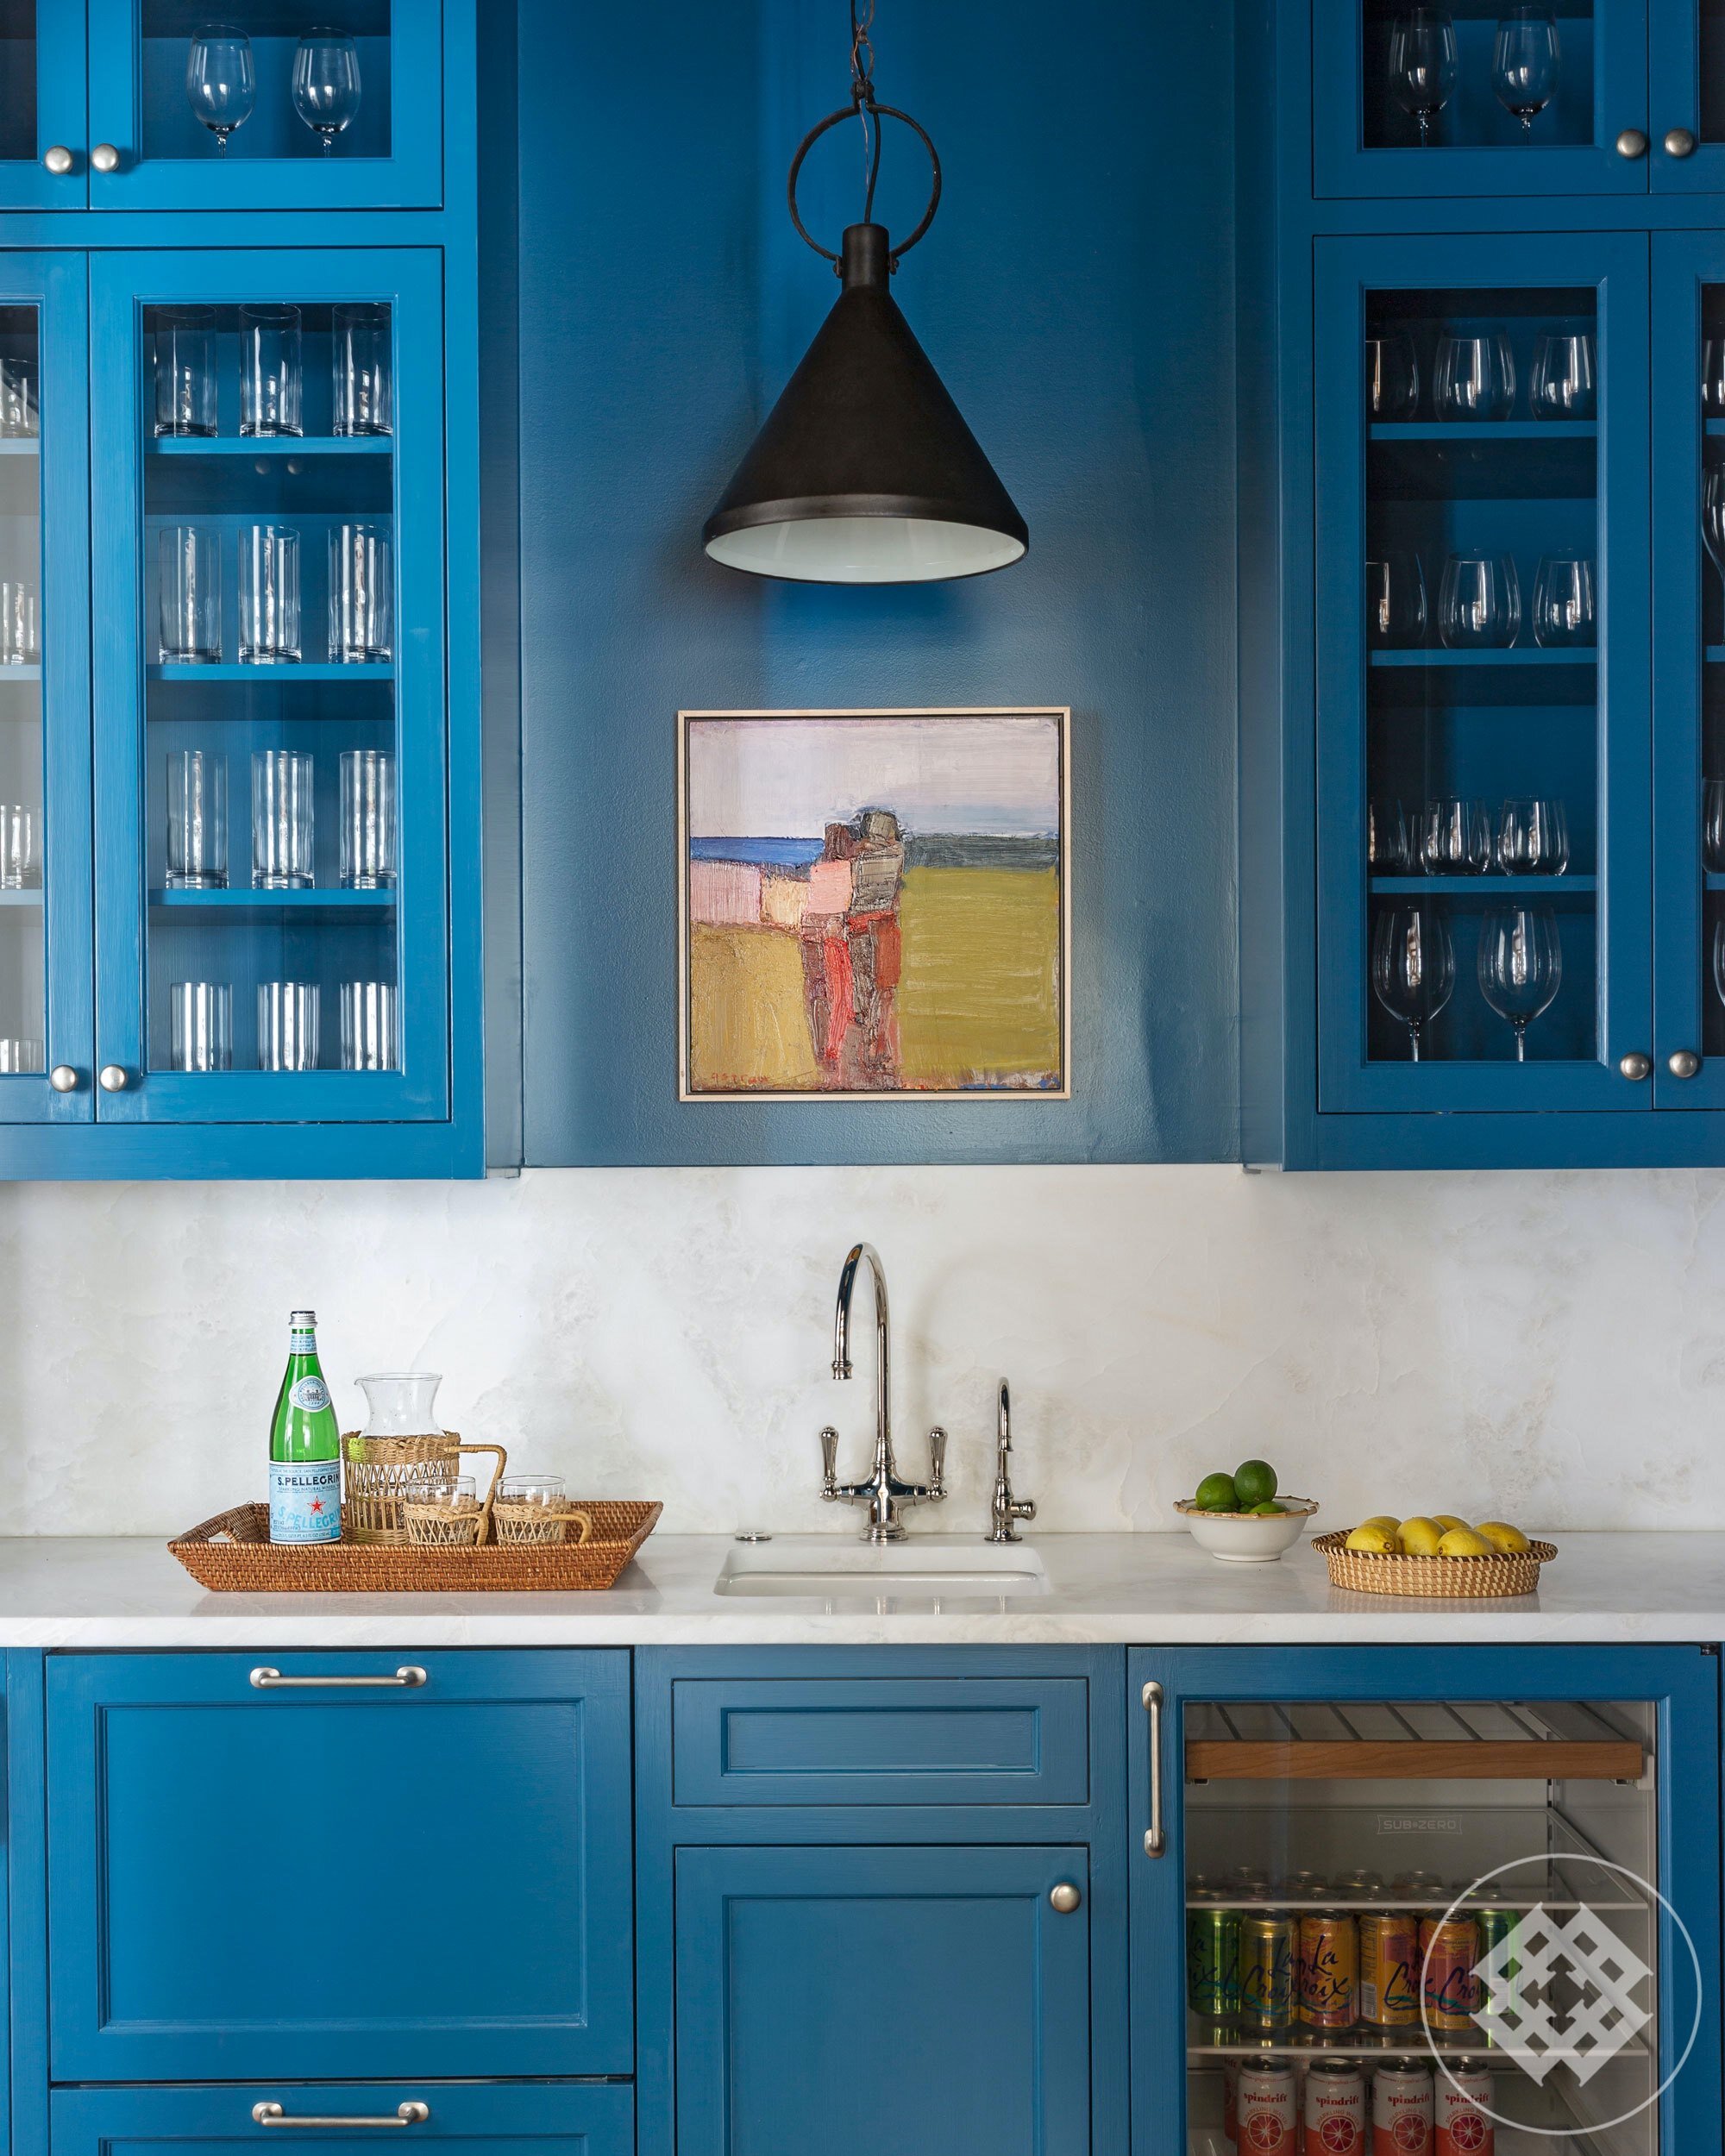 shc-12-butlers-pantry-with-shaker-style-cabinets-laquered-in-benjamin-moore-blue-danube.jpg